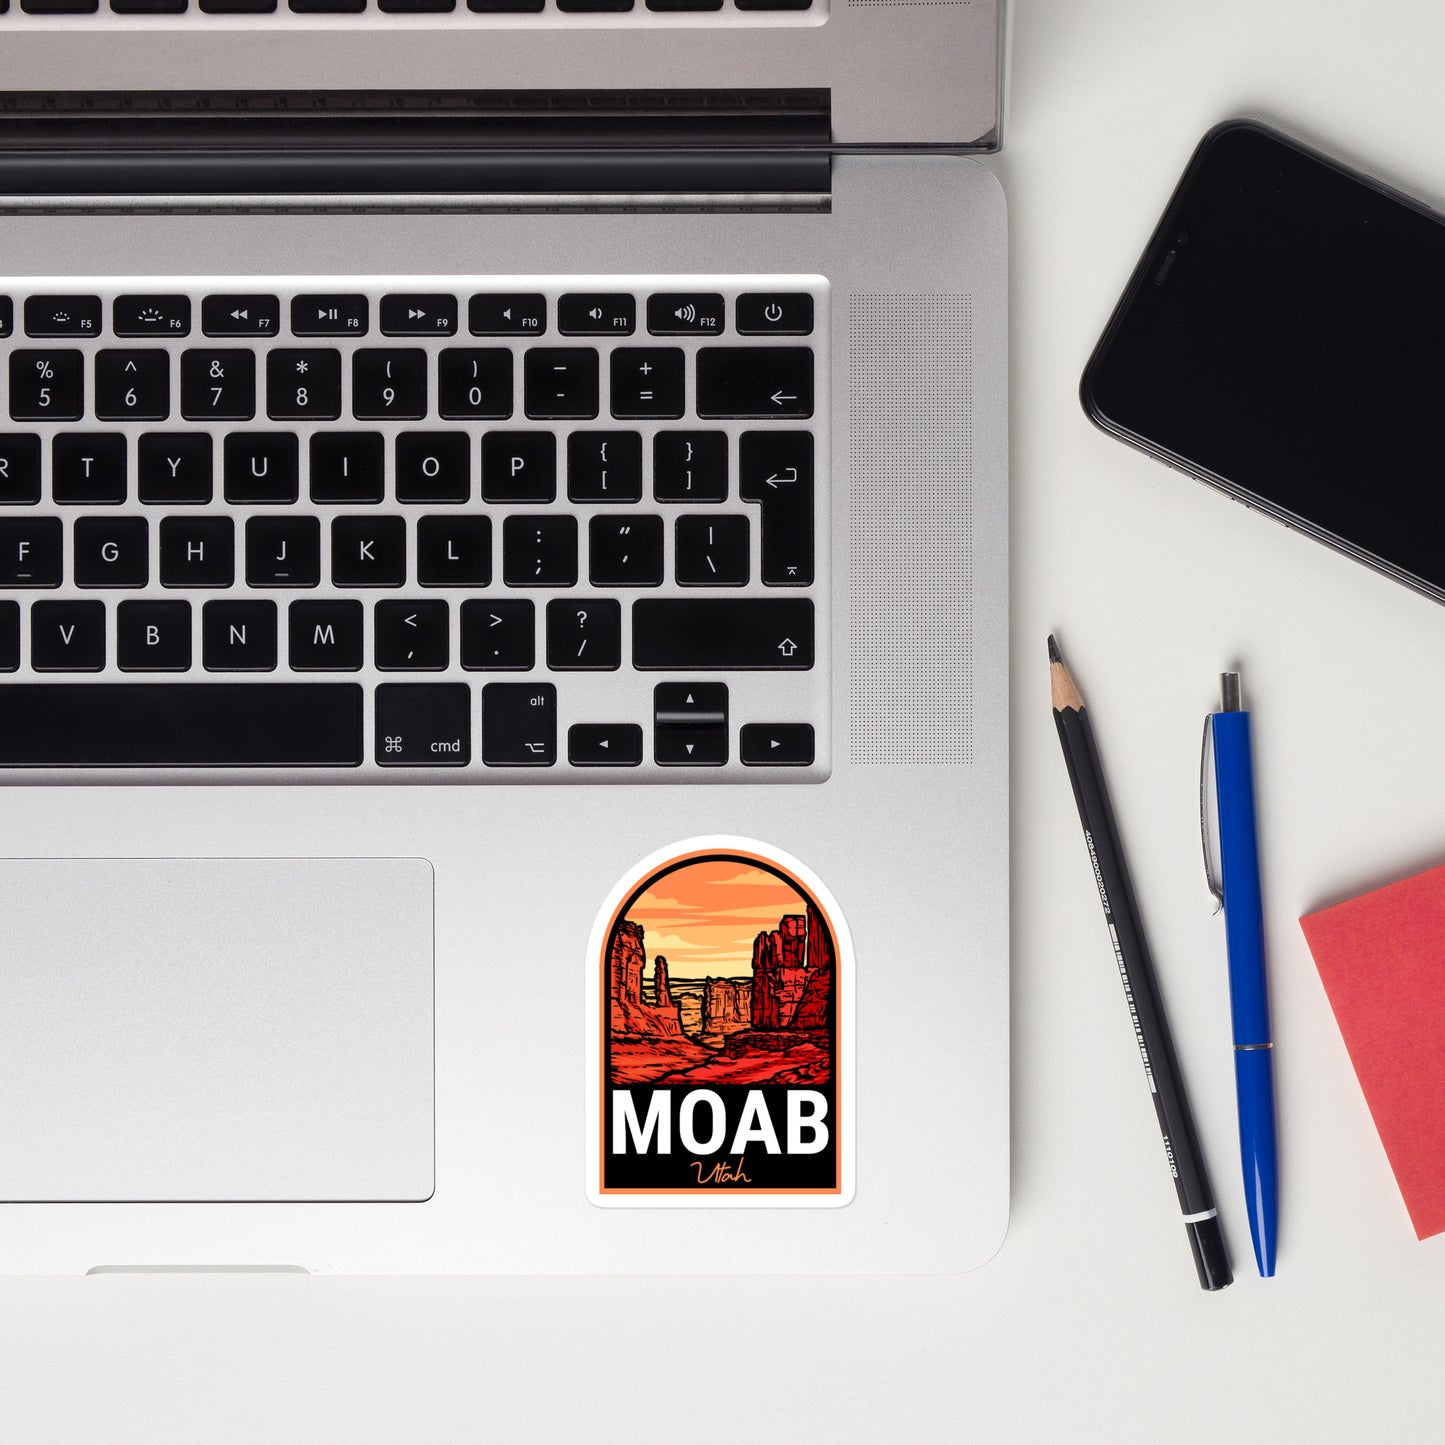 A sticker of Moab Utah on a laptop